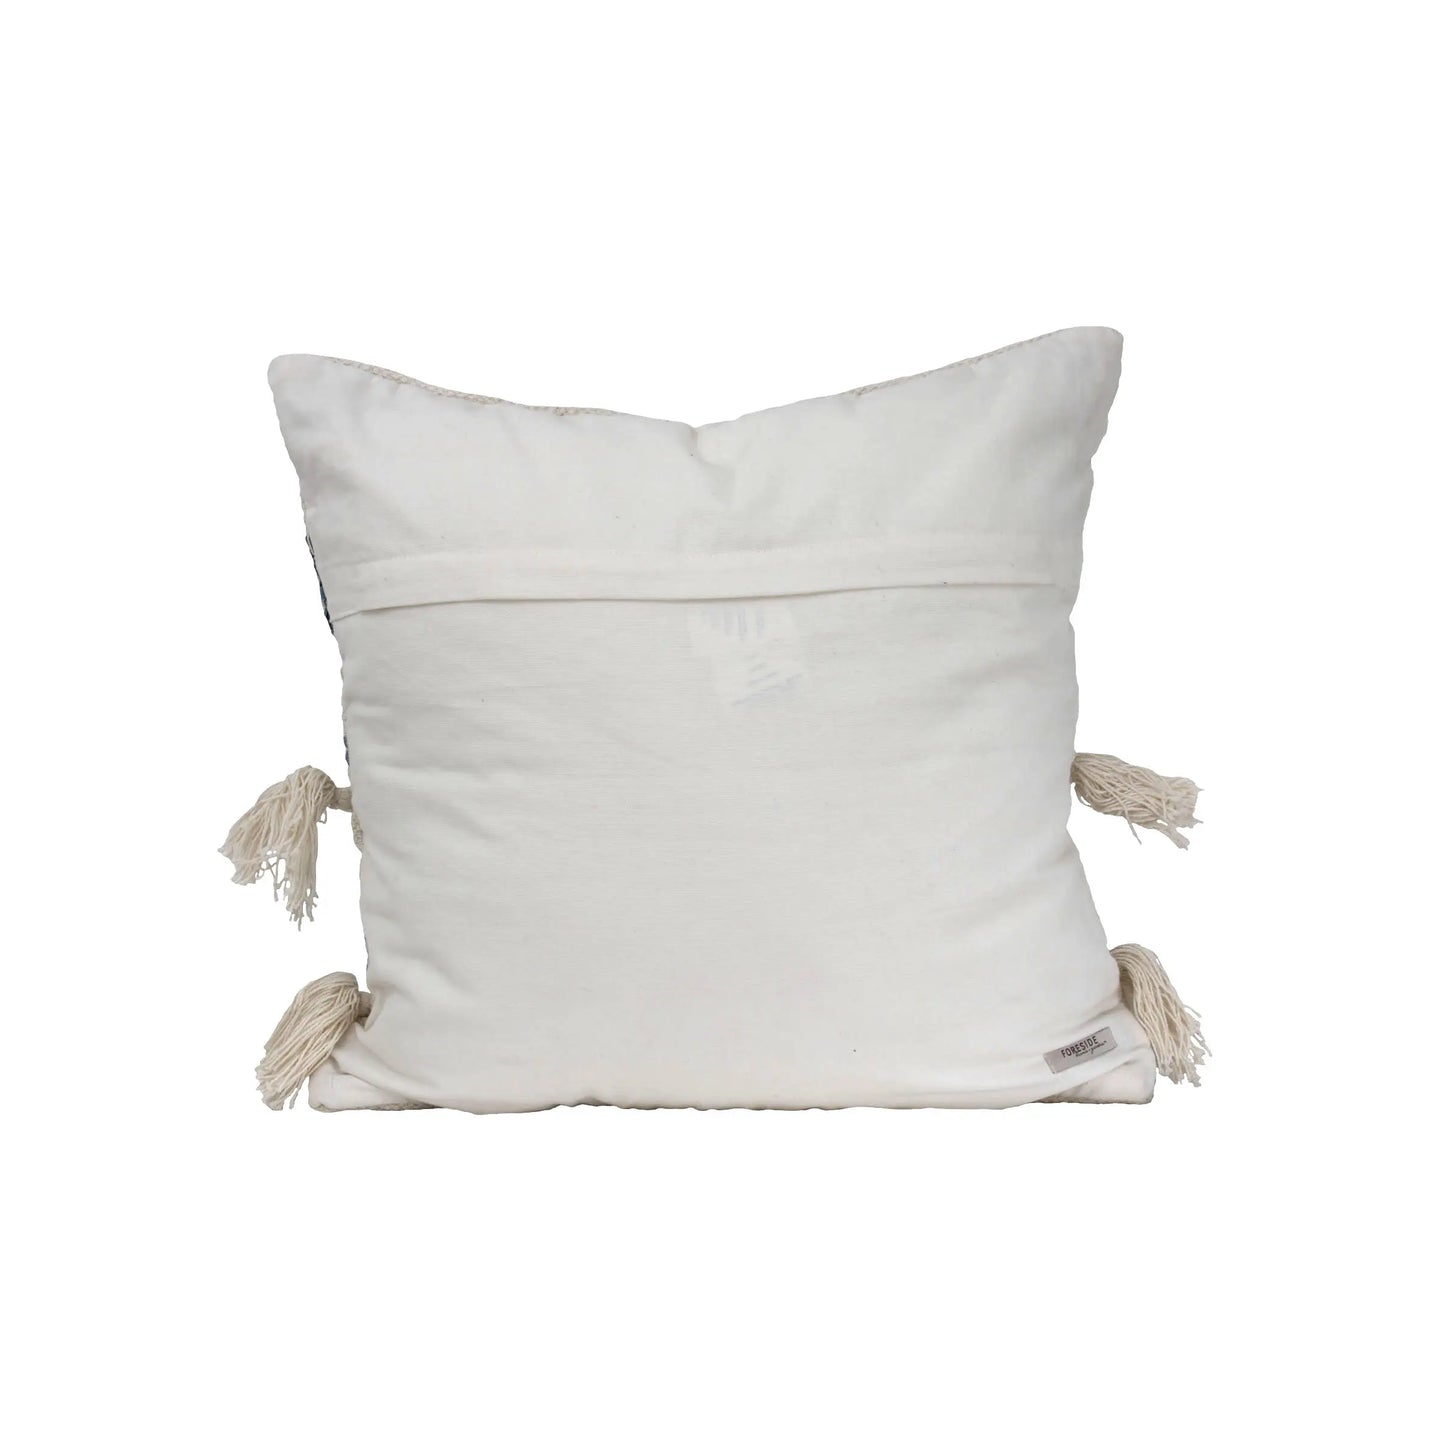 Hand Woven Bone Pillow with Tassels